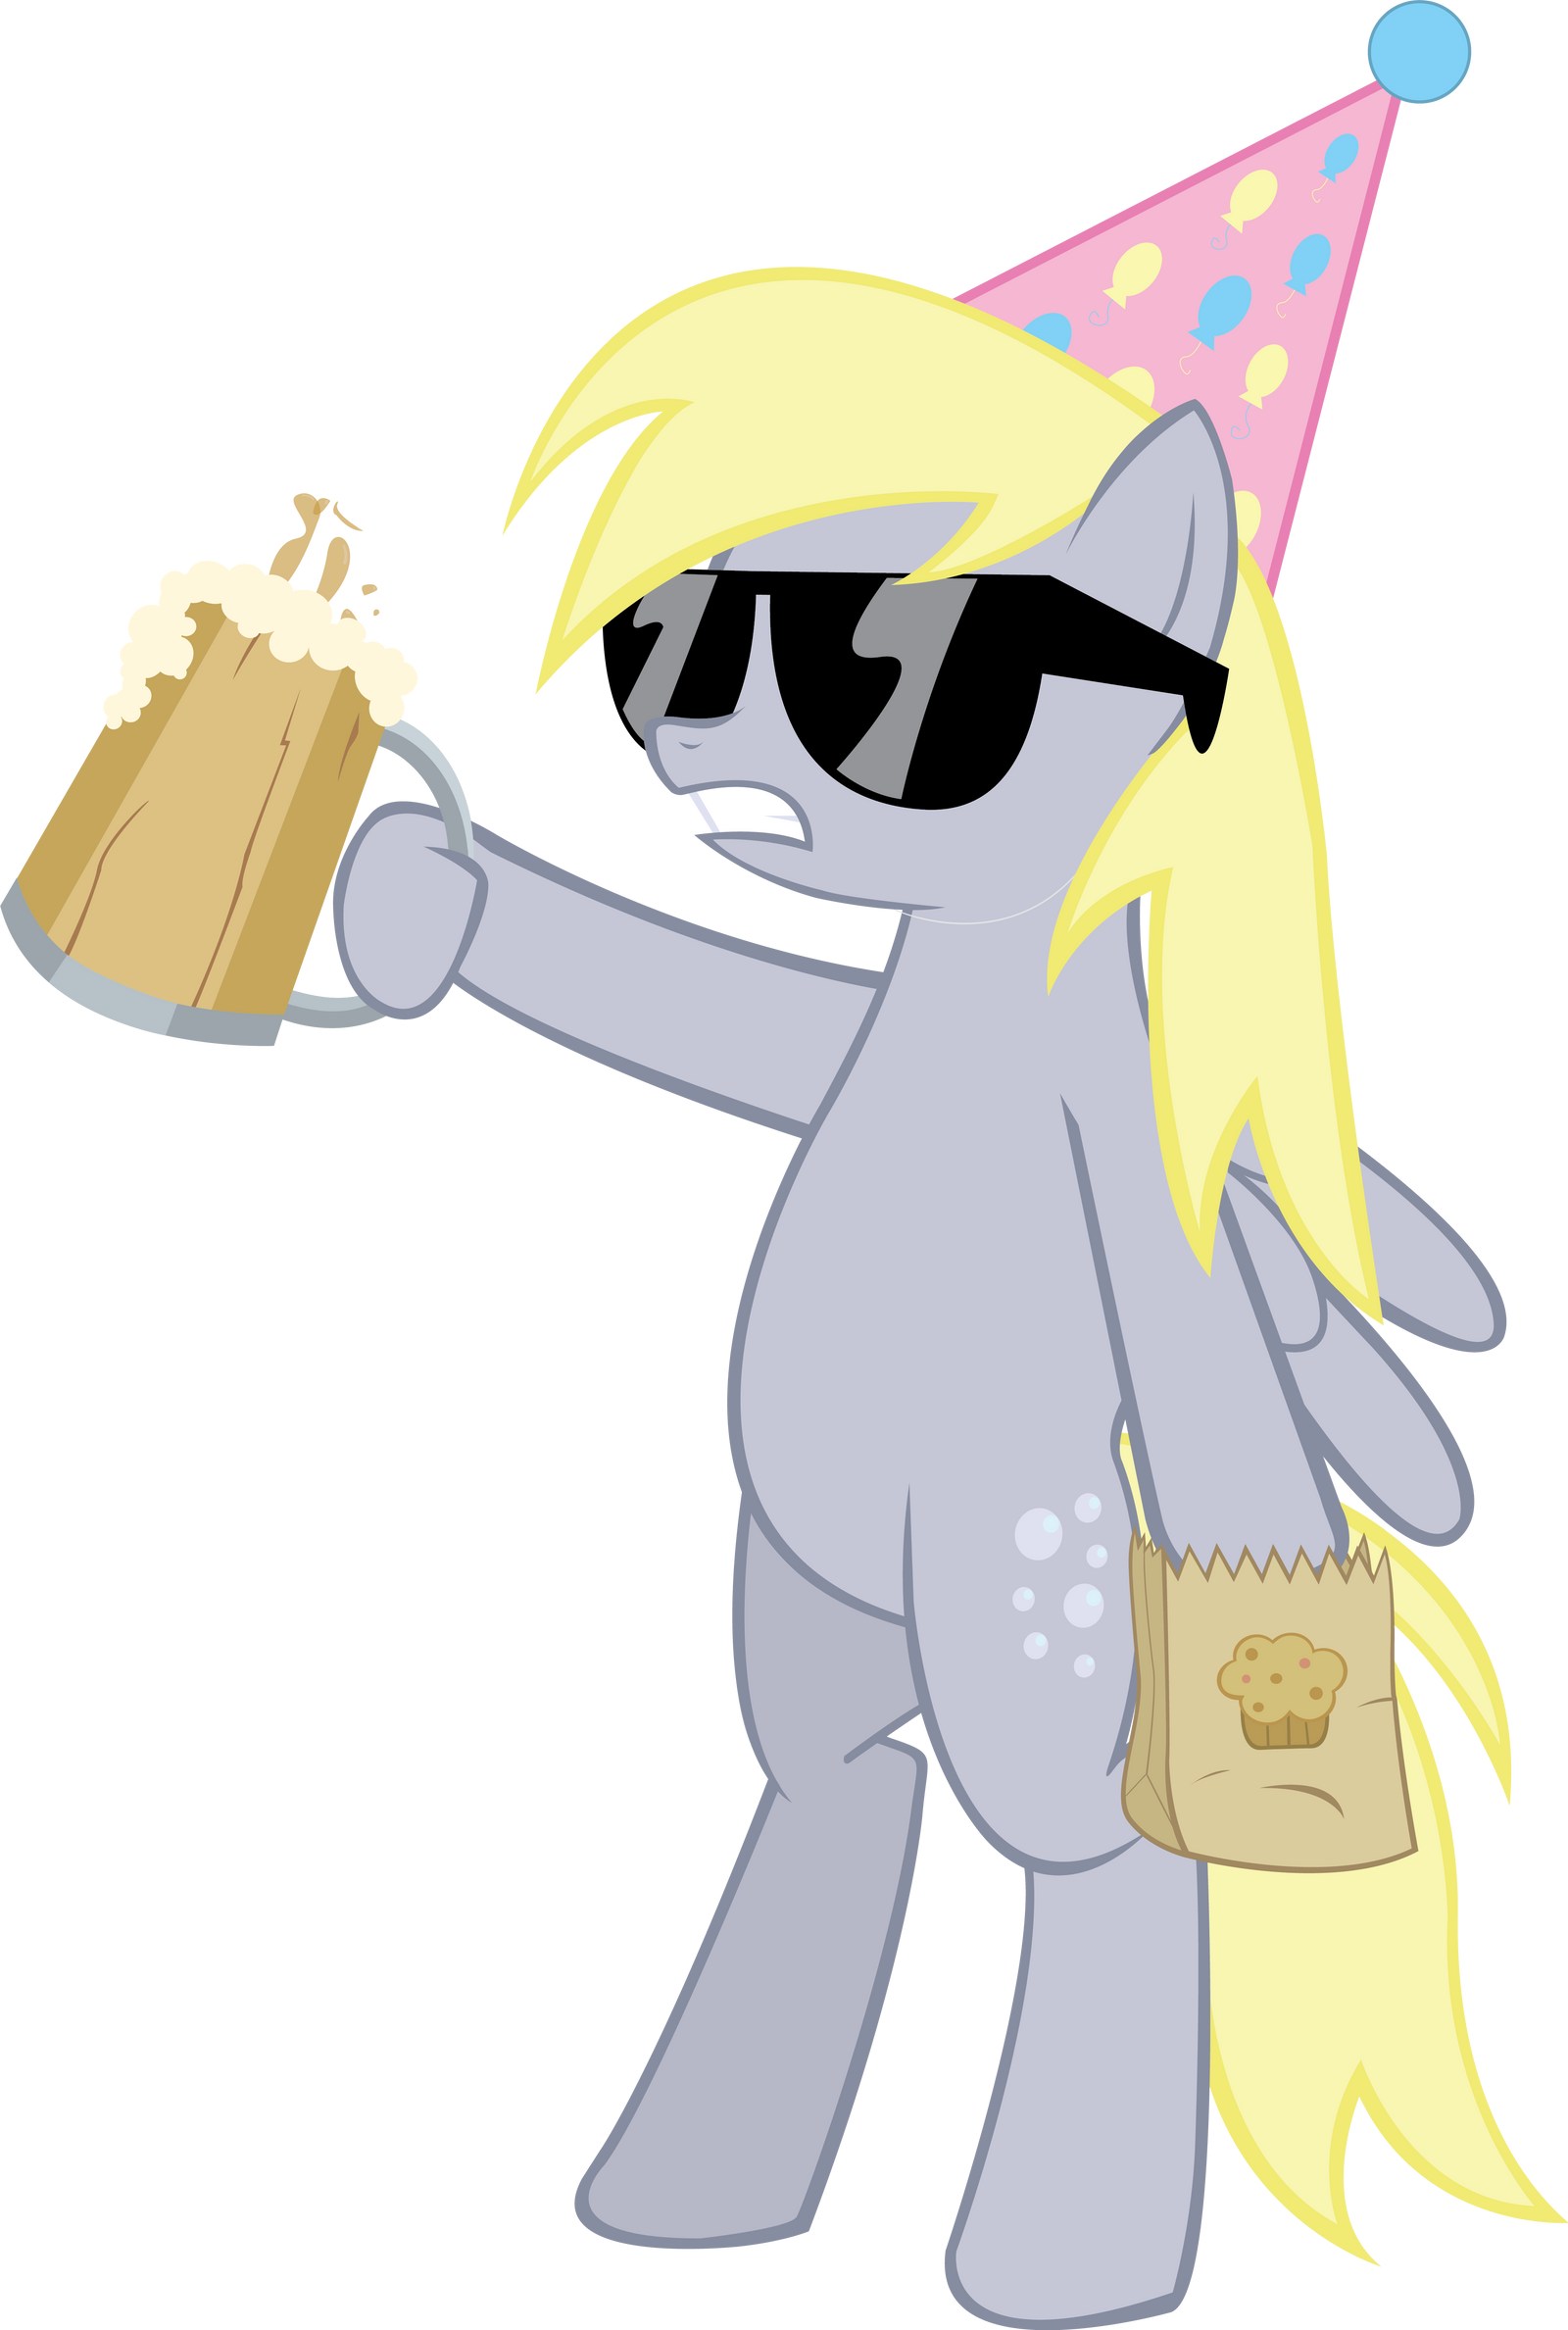 cider_season_derpy_by_the_crusius-d4w50vi.png